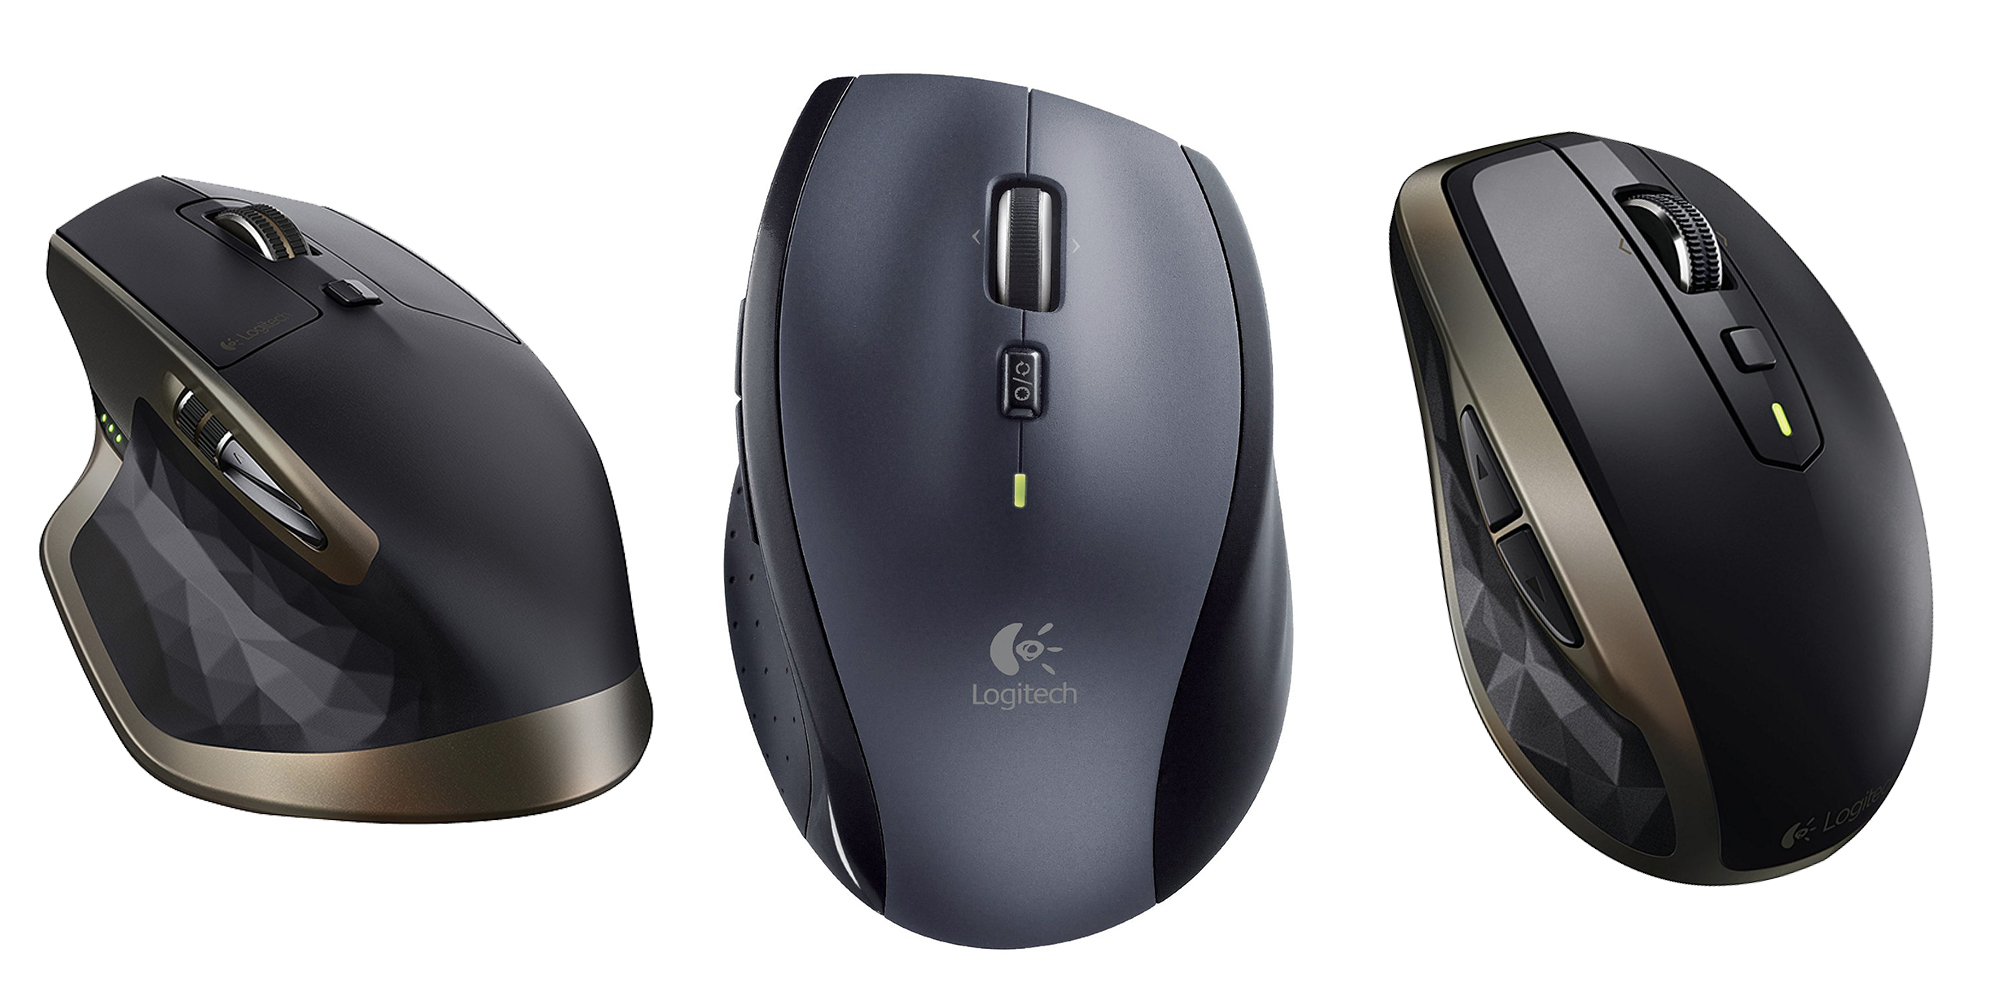 best mouse for macbook under 30